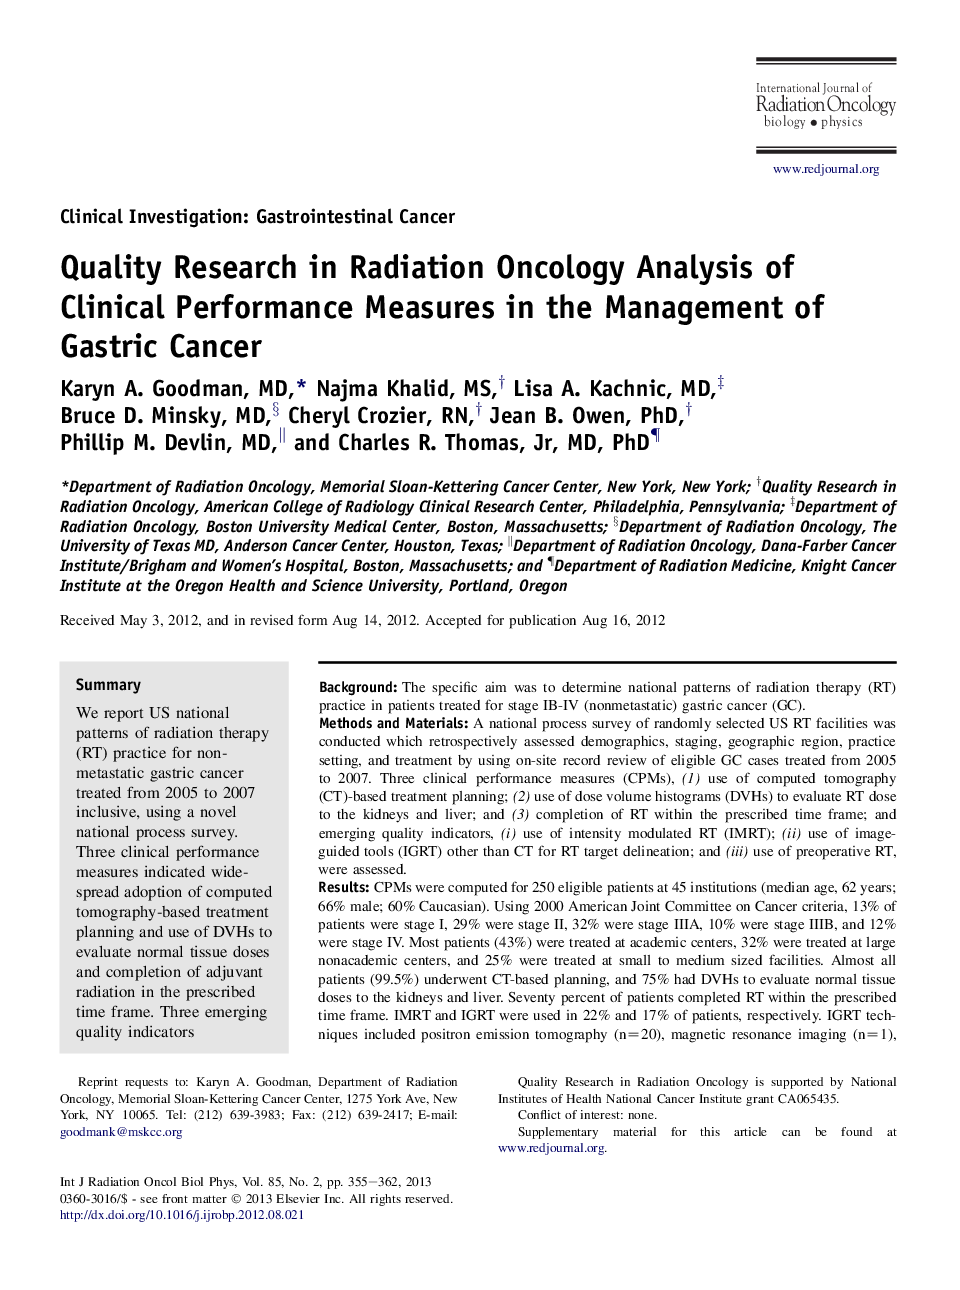 Quality Research in Radiation Oncology Analysis of Clinical Performance Measures in the Management of Gastric Cancer